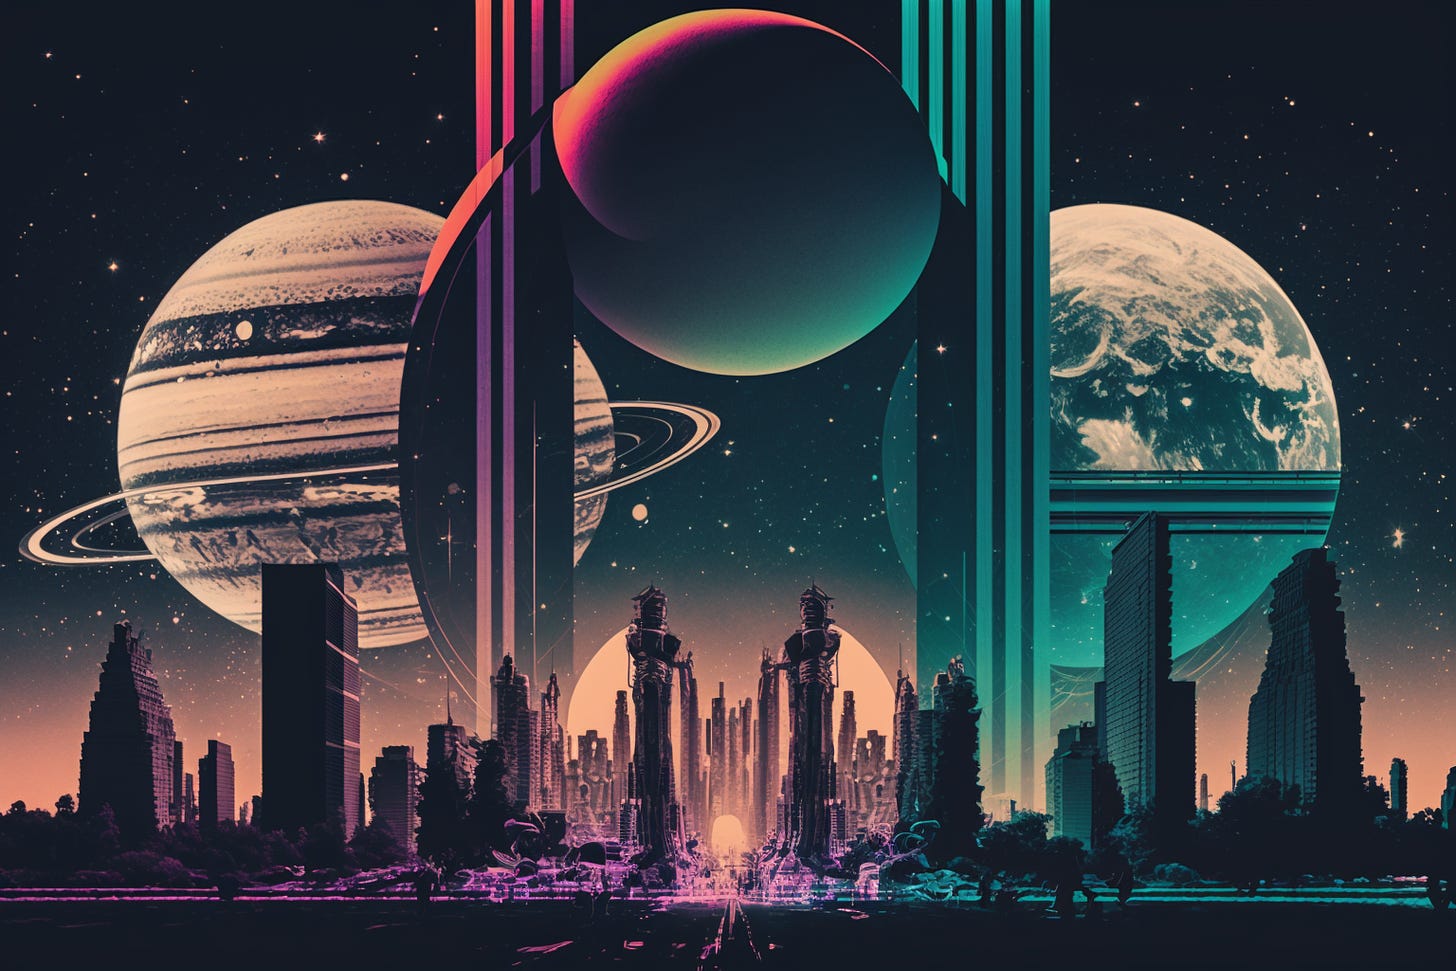 Midjourney-generated image of multiple planets looming over giant futuristic city with large abstract lines crossing the image